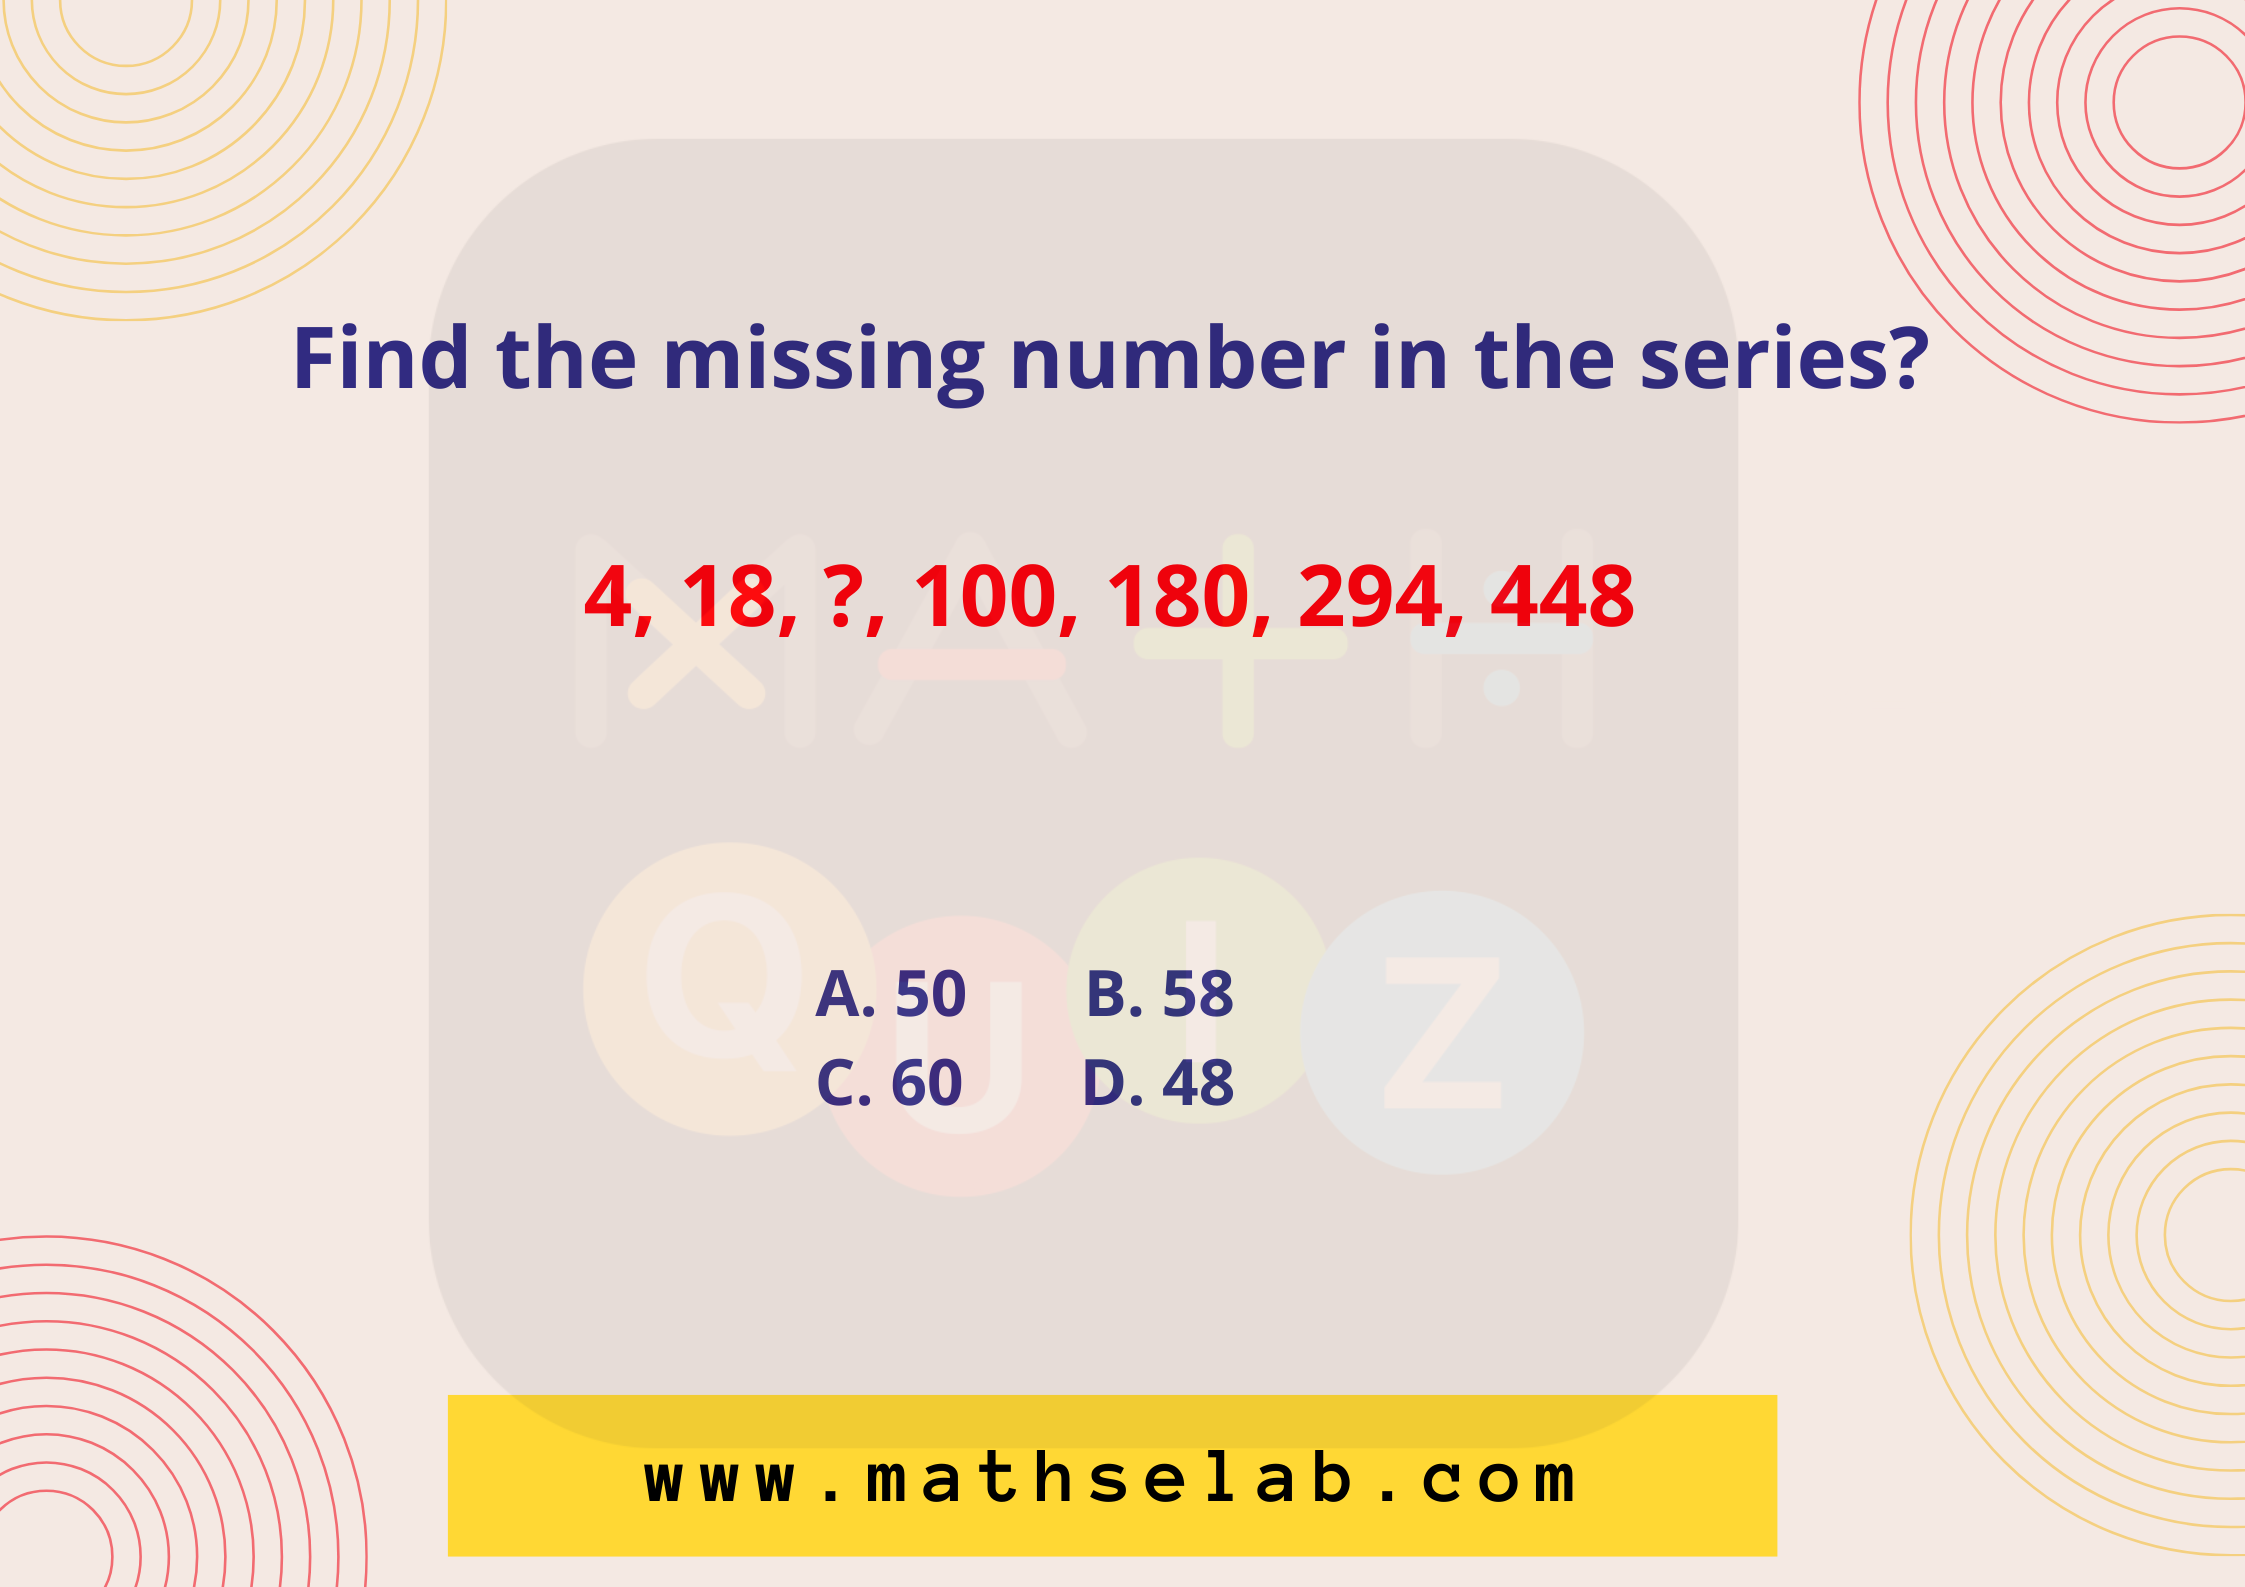 Find the missing number in the series? 4, 18, ?, 100, 180, 294, 448